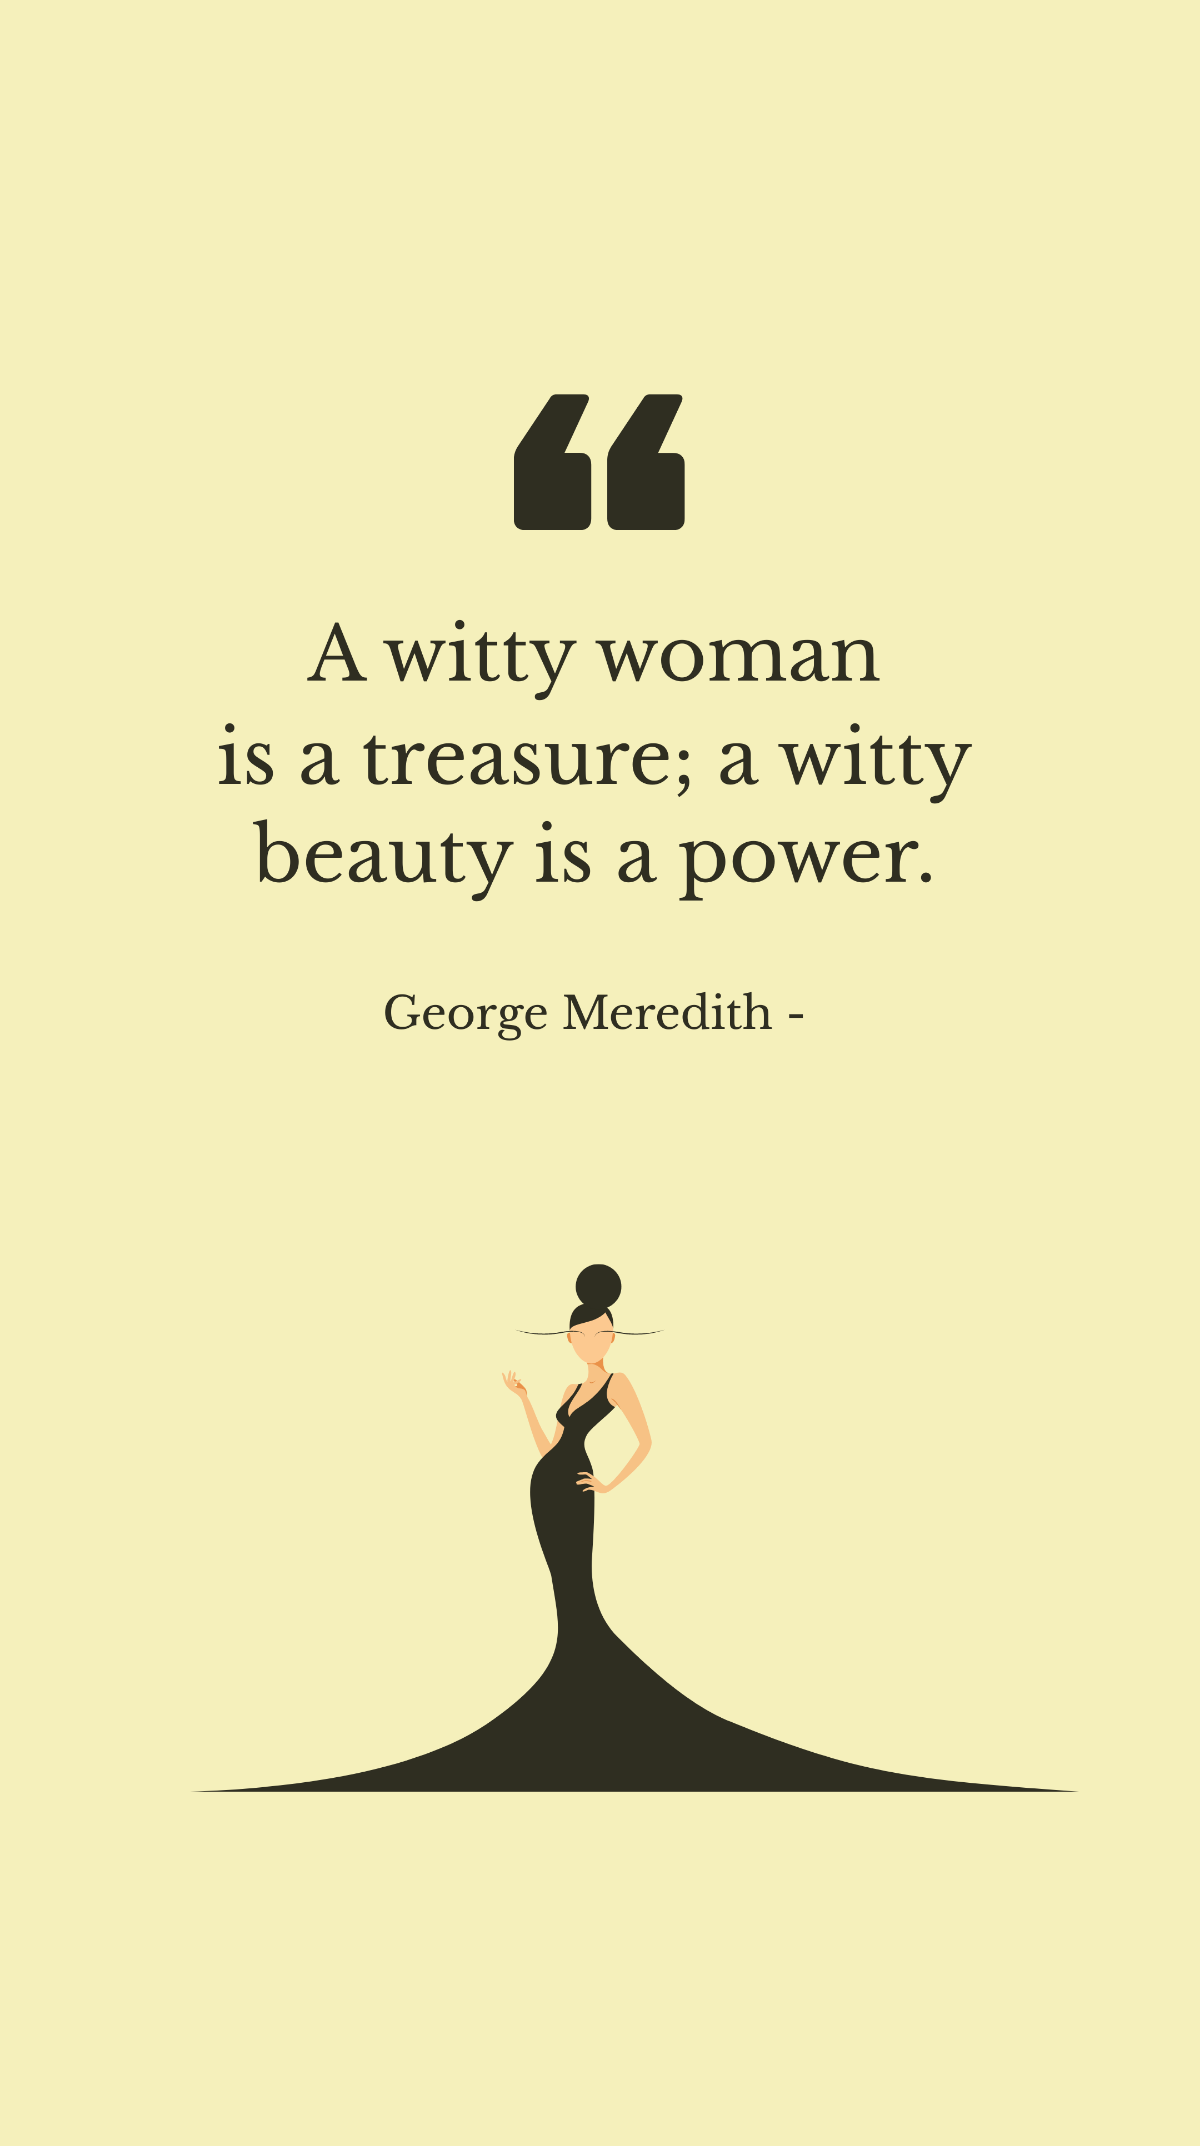 Free George Meredith - A witty woman is a treasure; a witty beauty is a power. Template